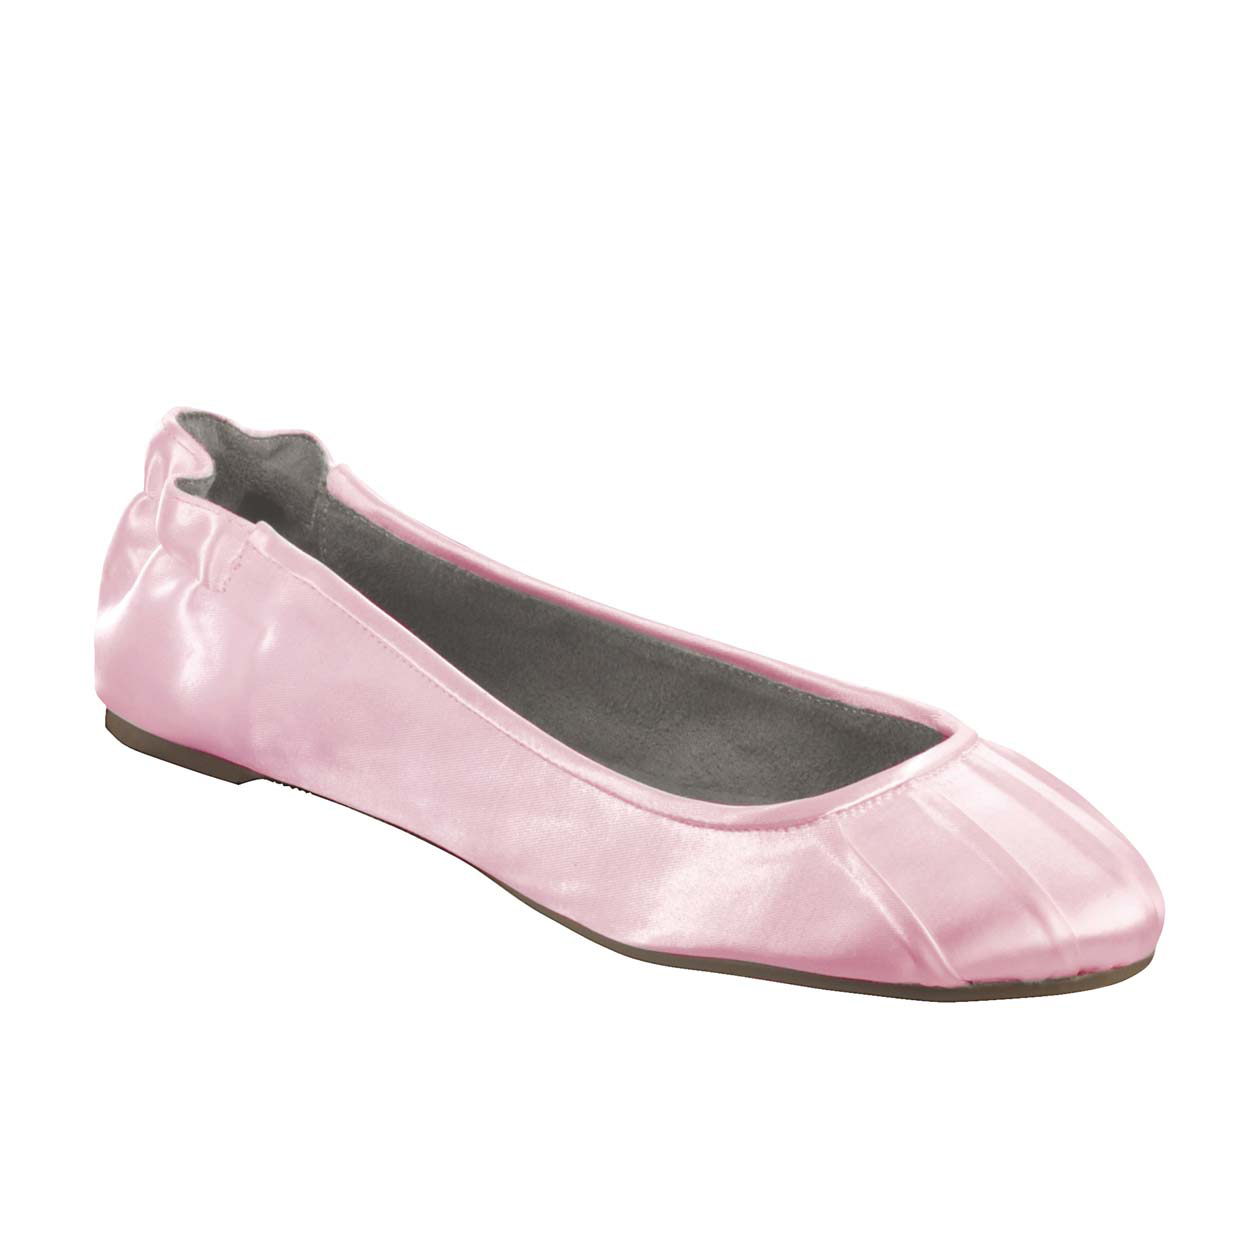 DYEABLES BELLA WHITE SATIN FLAT - Dyeable Shoe Store